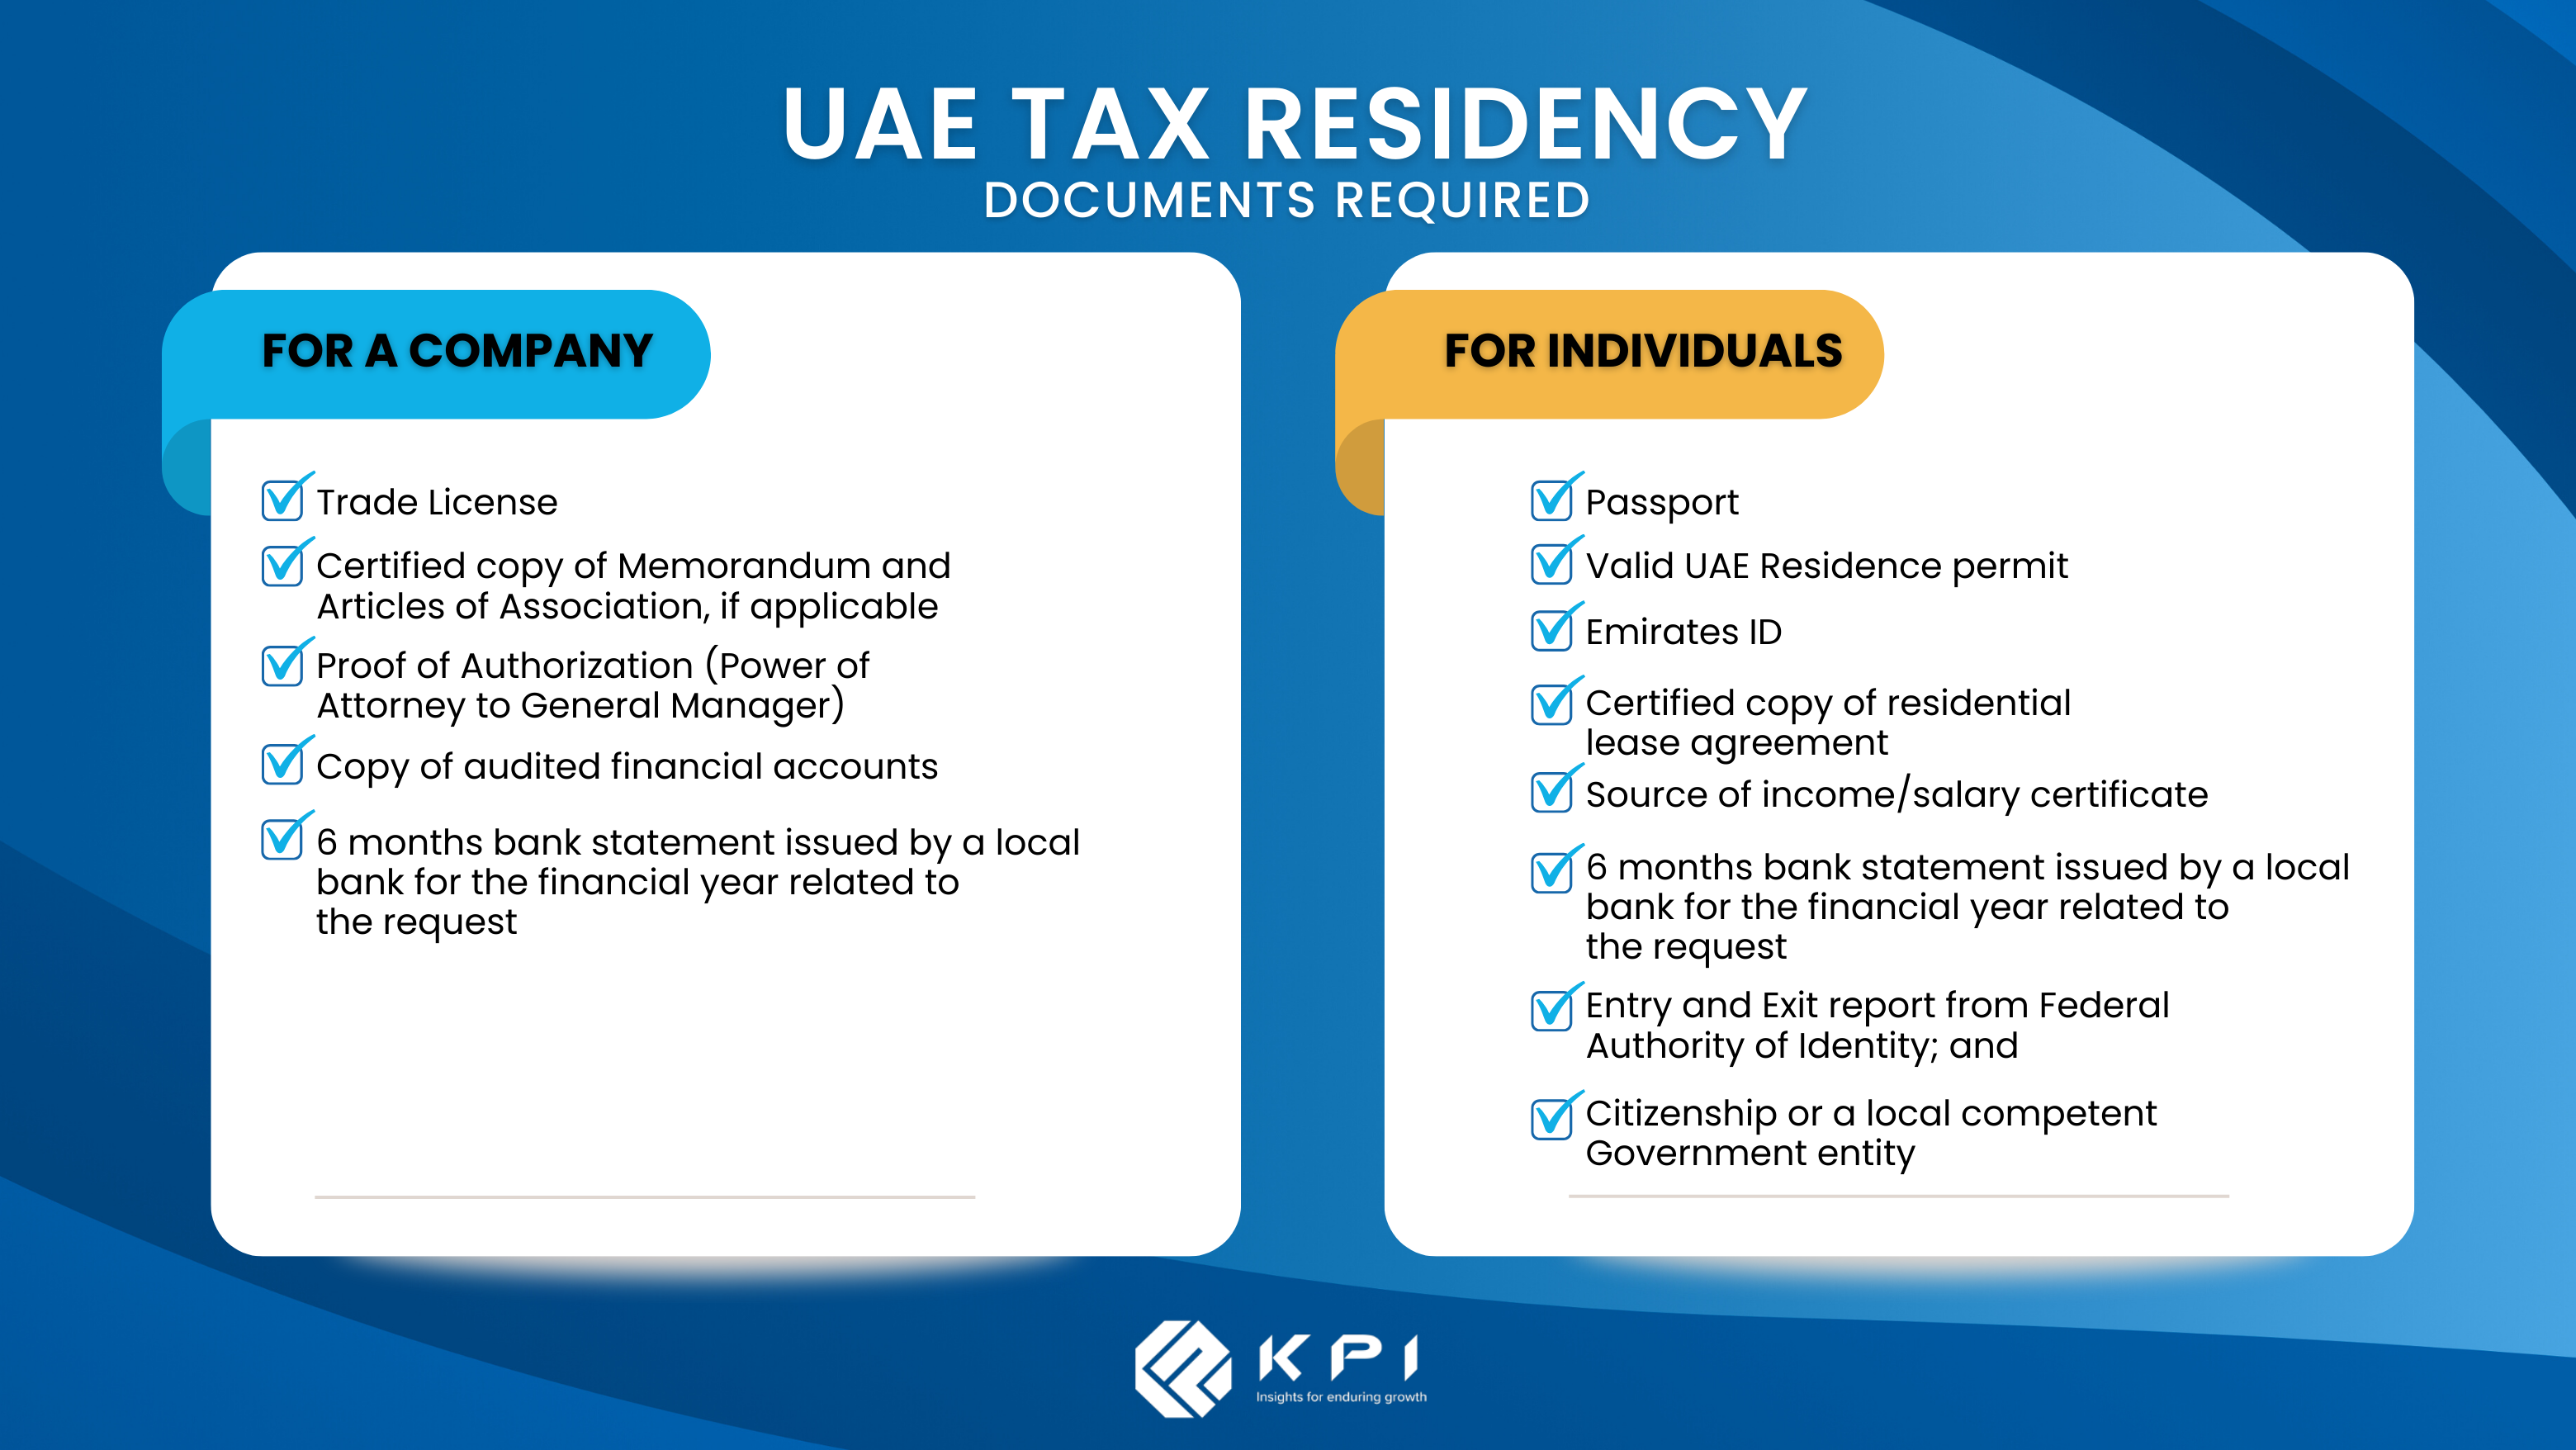 How to get the tax residency certificate